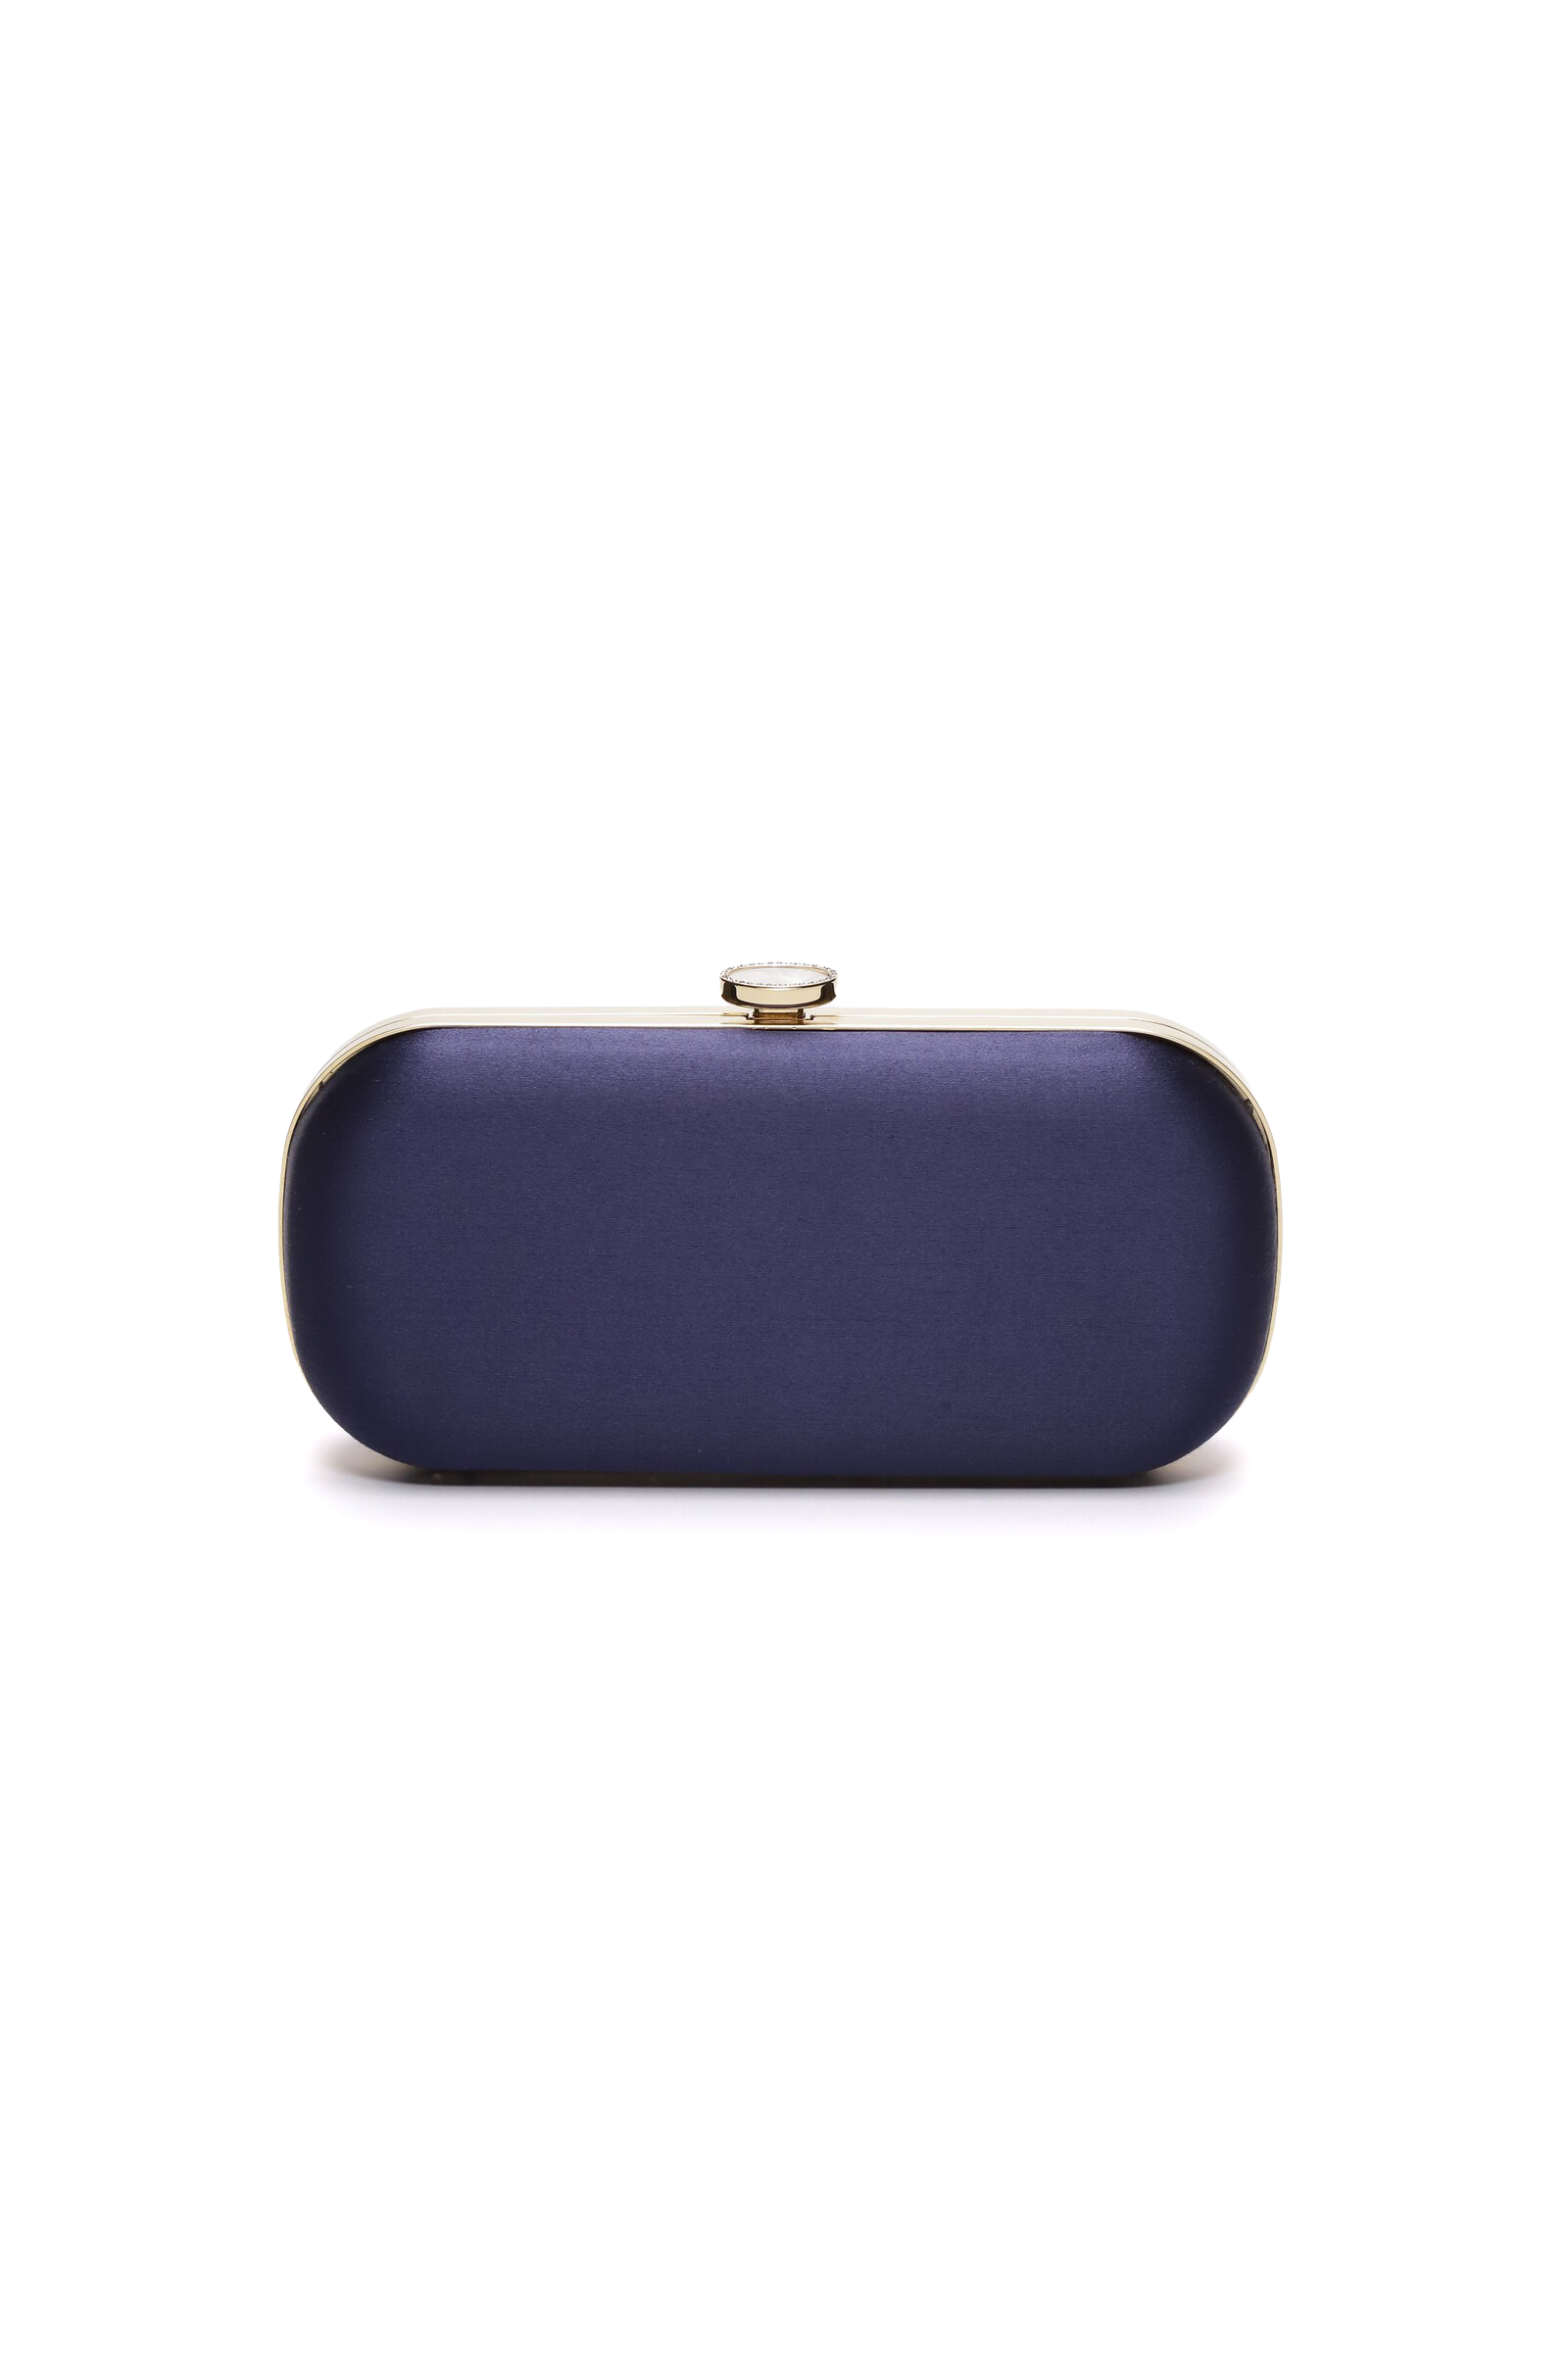 The Bella Rosa Collection Bella Clutch Navy Blue Petite isolated on white background.